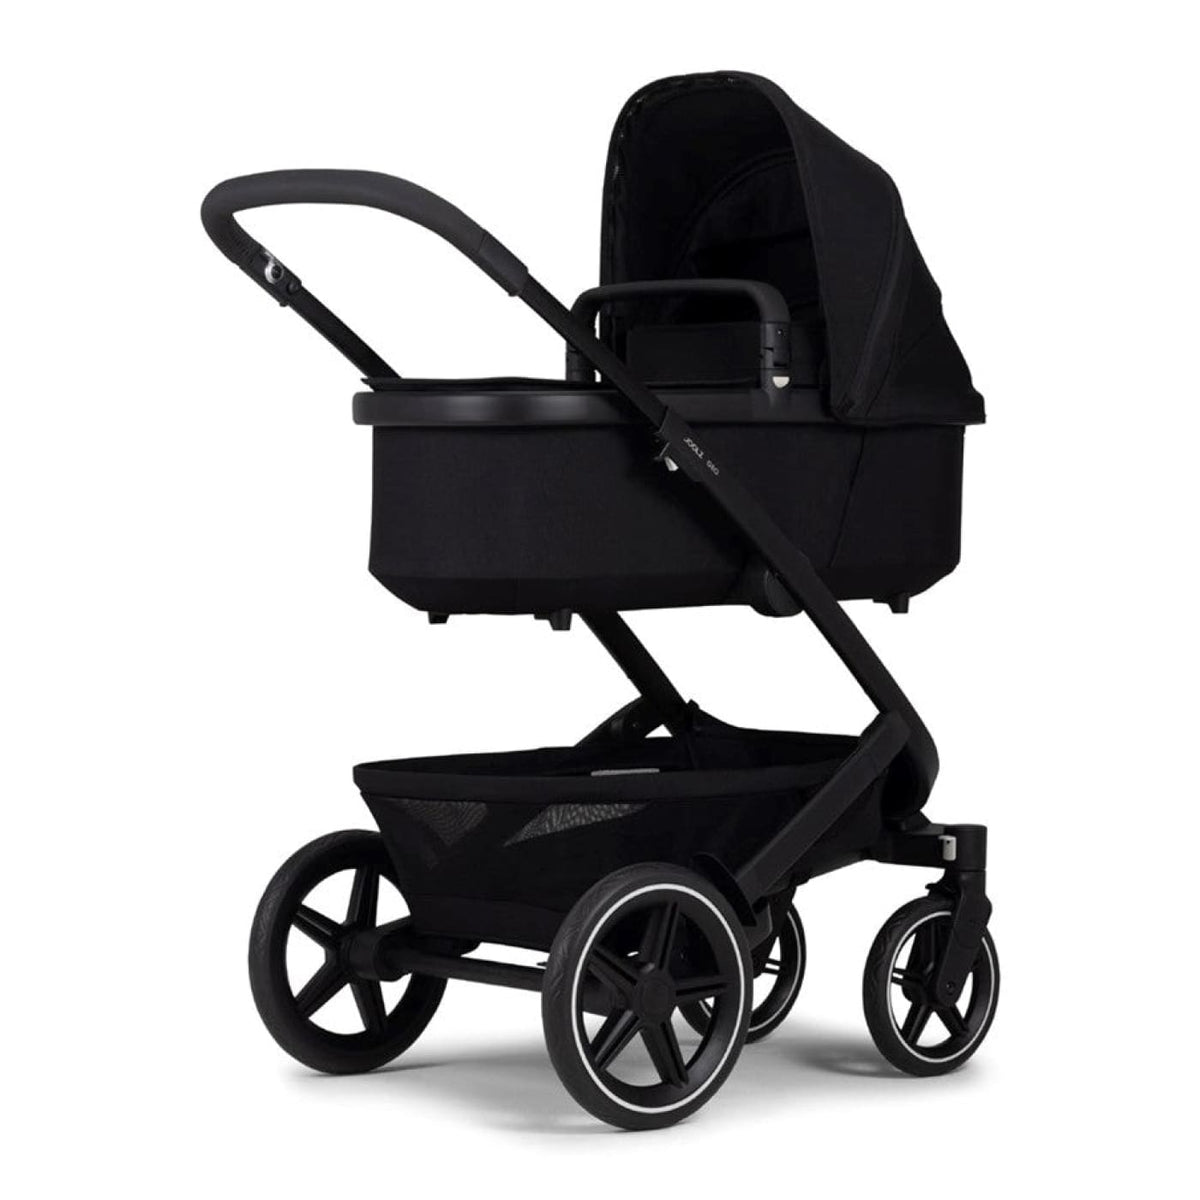 Joolz Geo3 Duo Stroller - Brilliant Black (2 Seat + 1 Carry Cot) - PRAMS &amp; STROLLERS - PACKAGES